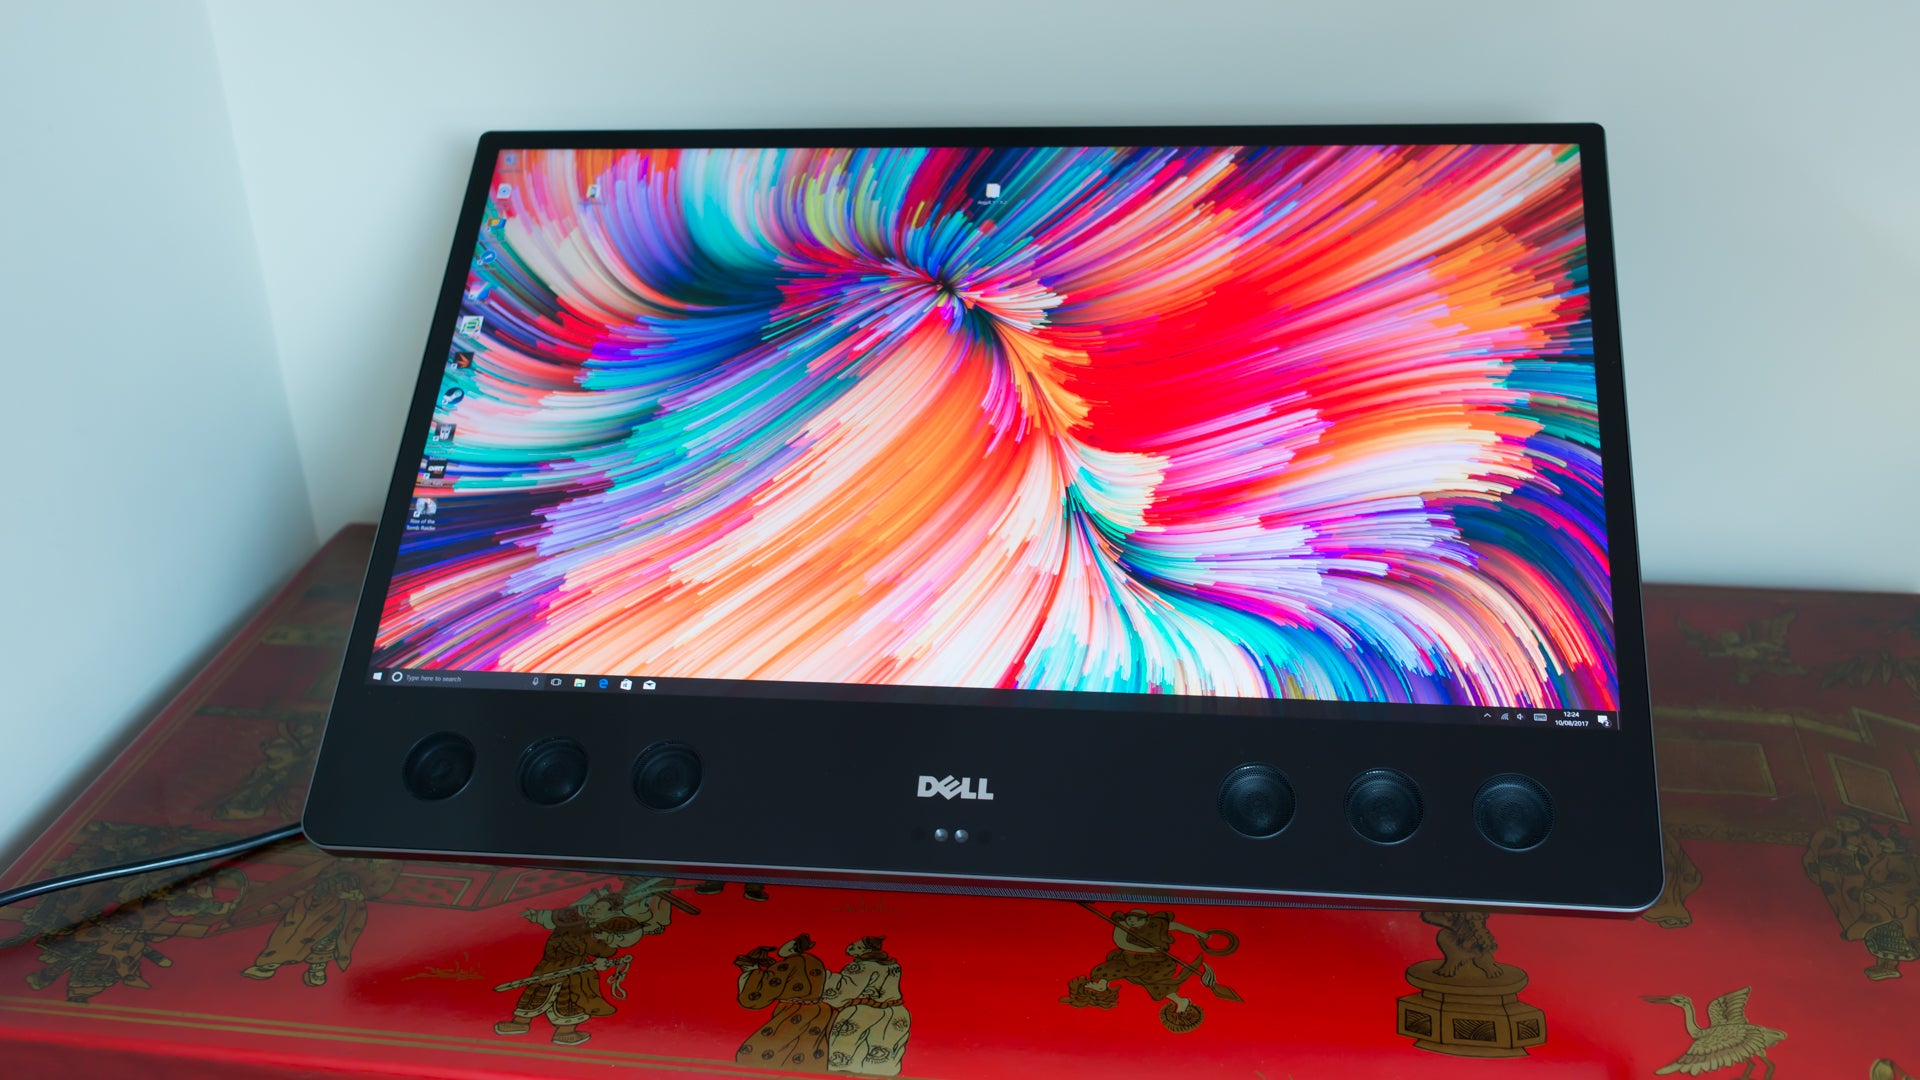 Dell XPS 27 All-in-One with vibrant display on desk.